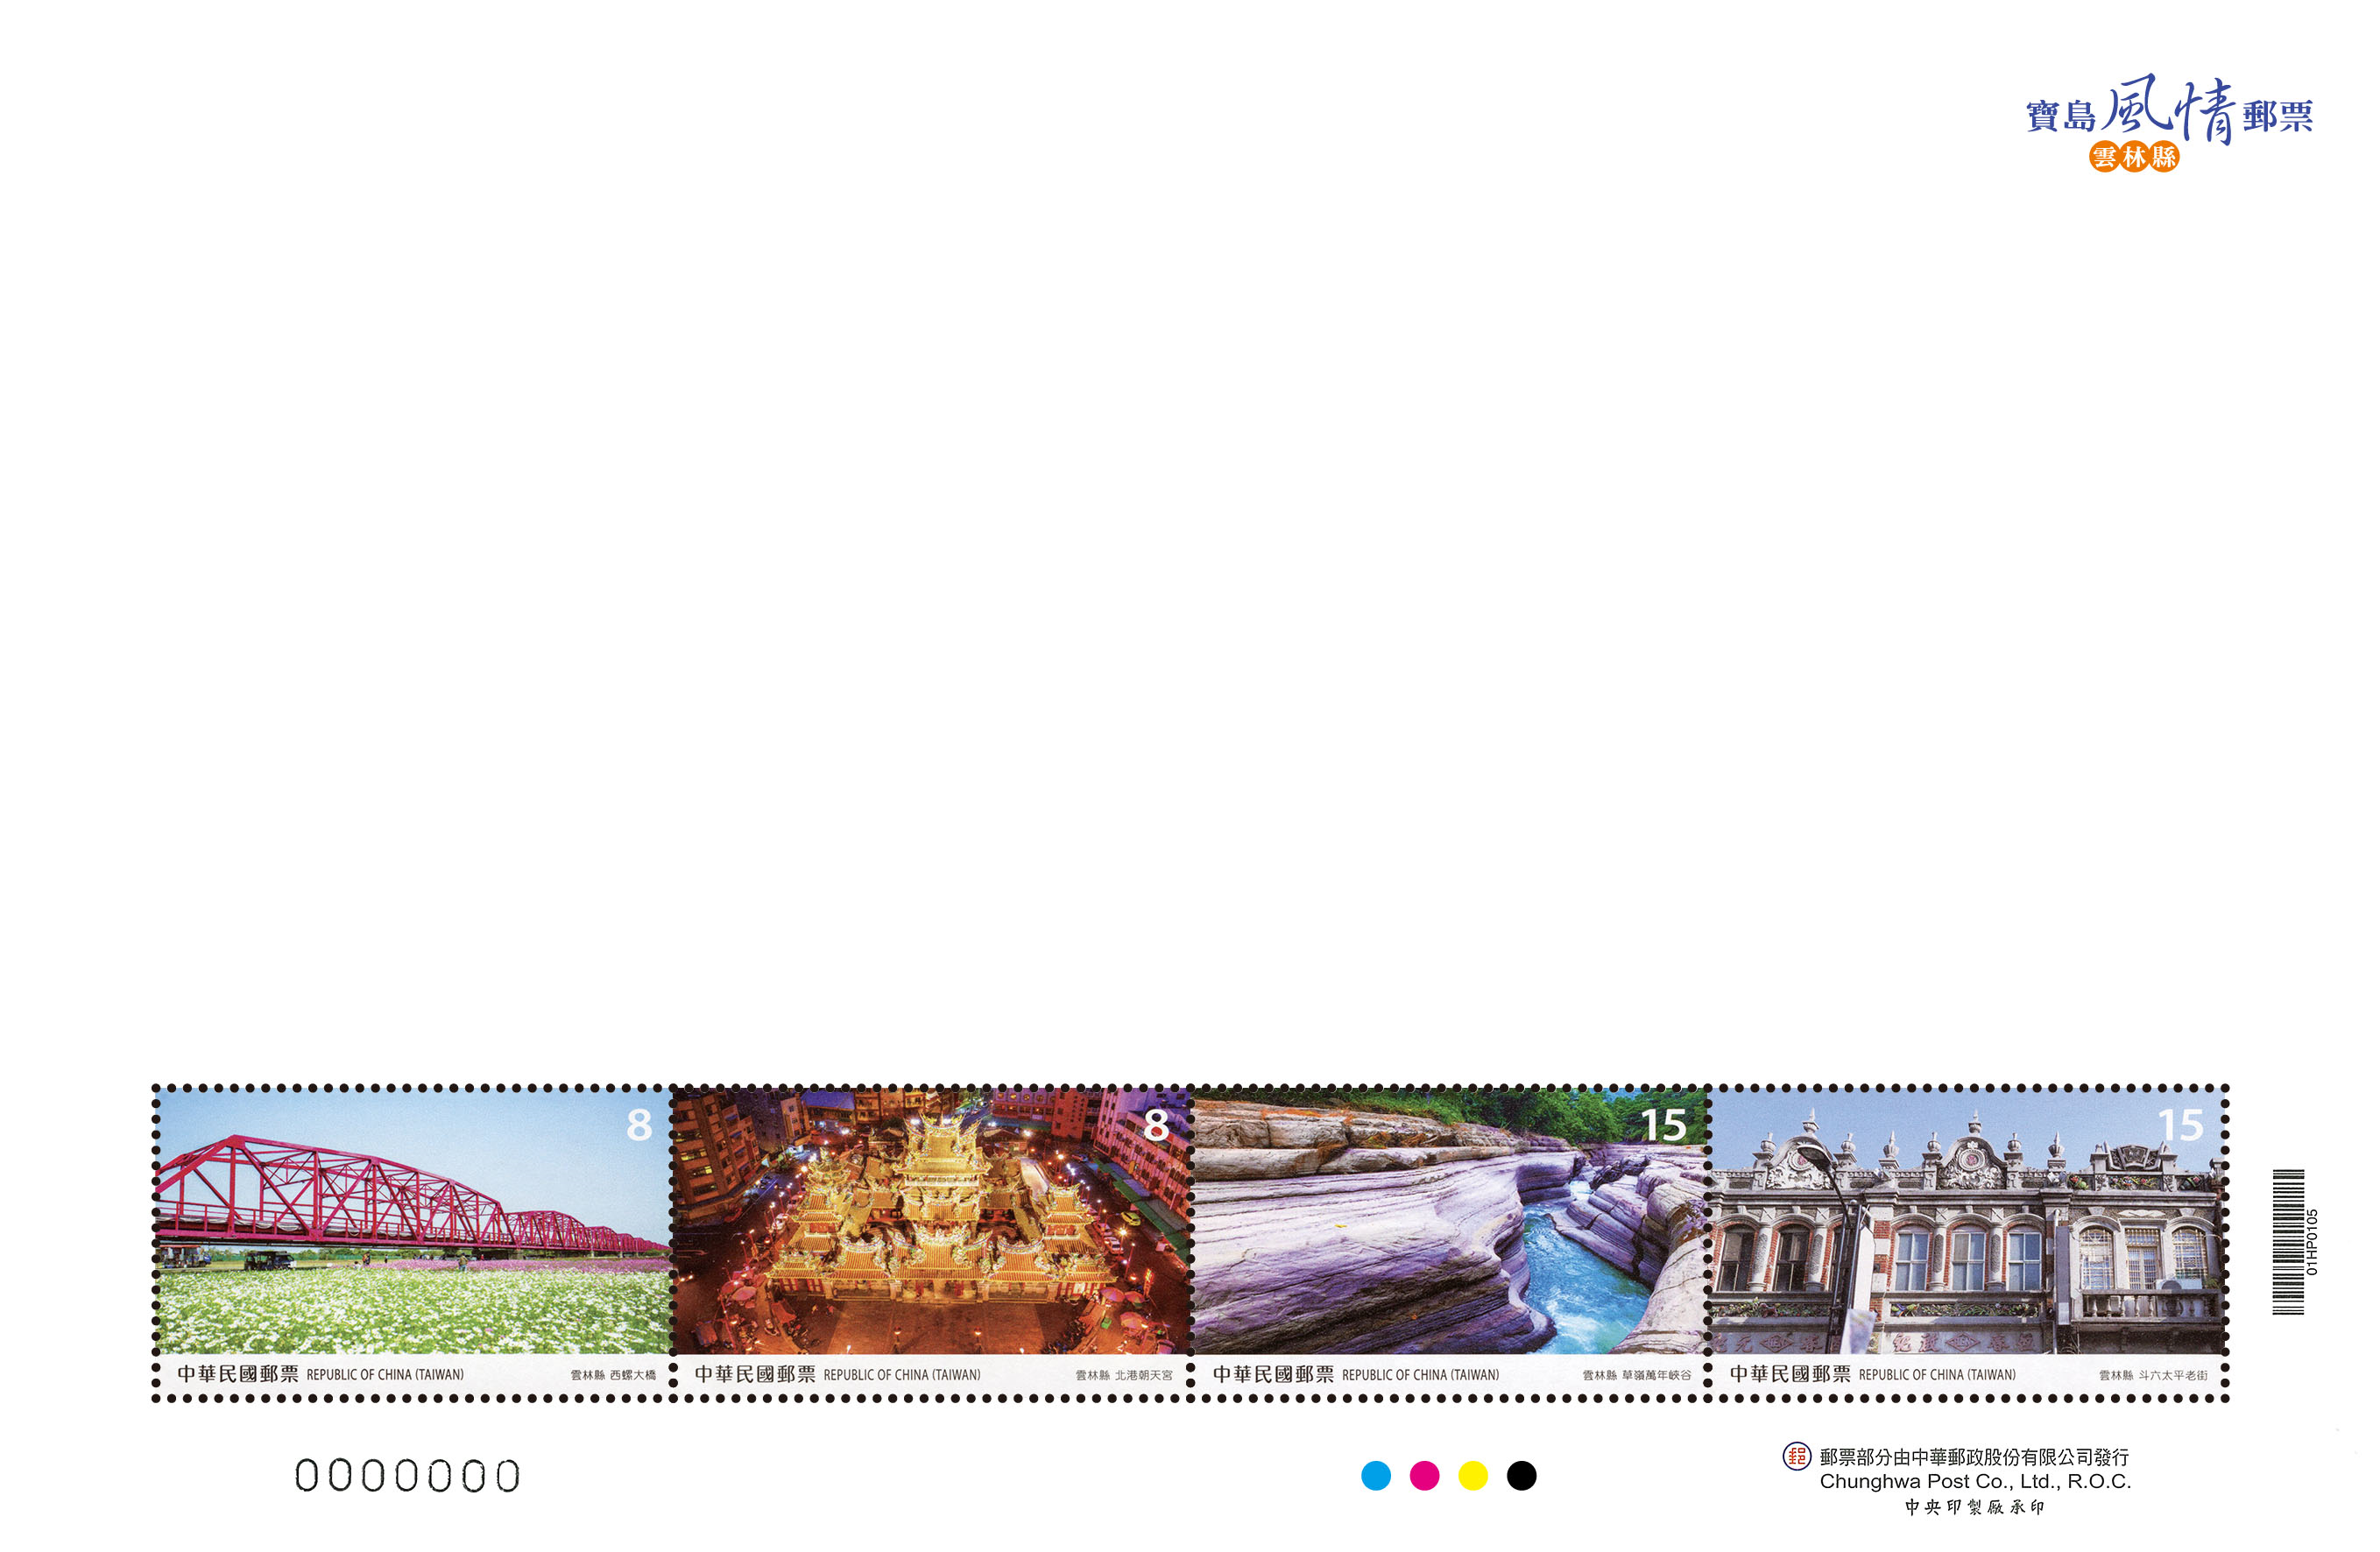 Taiwan Scenery Postage Stamps — Yunlin County  Personal greeting stamps